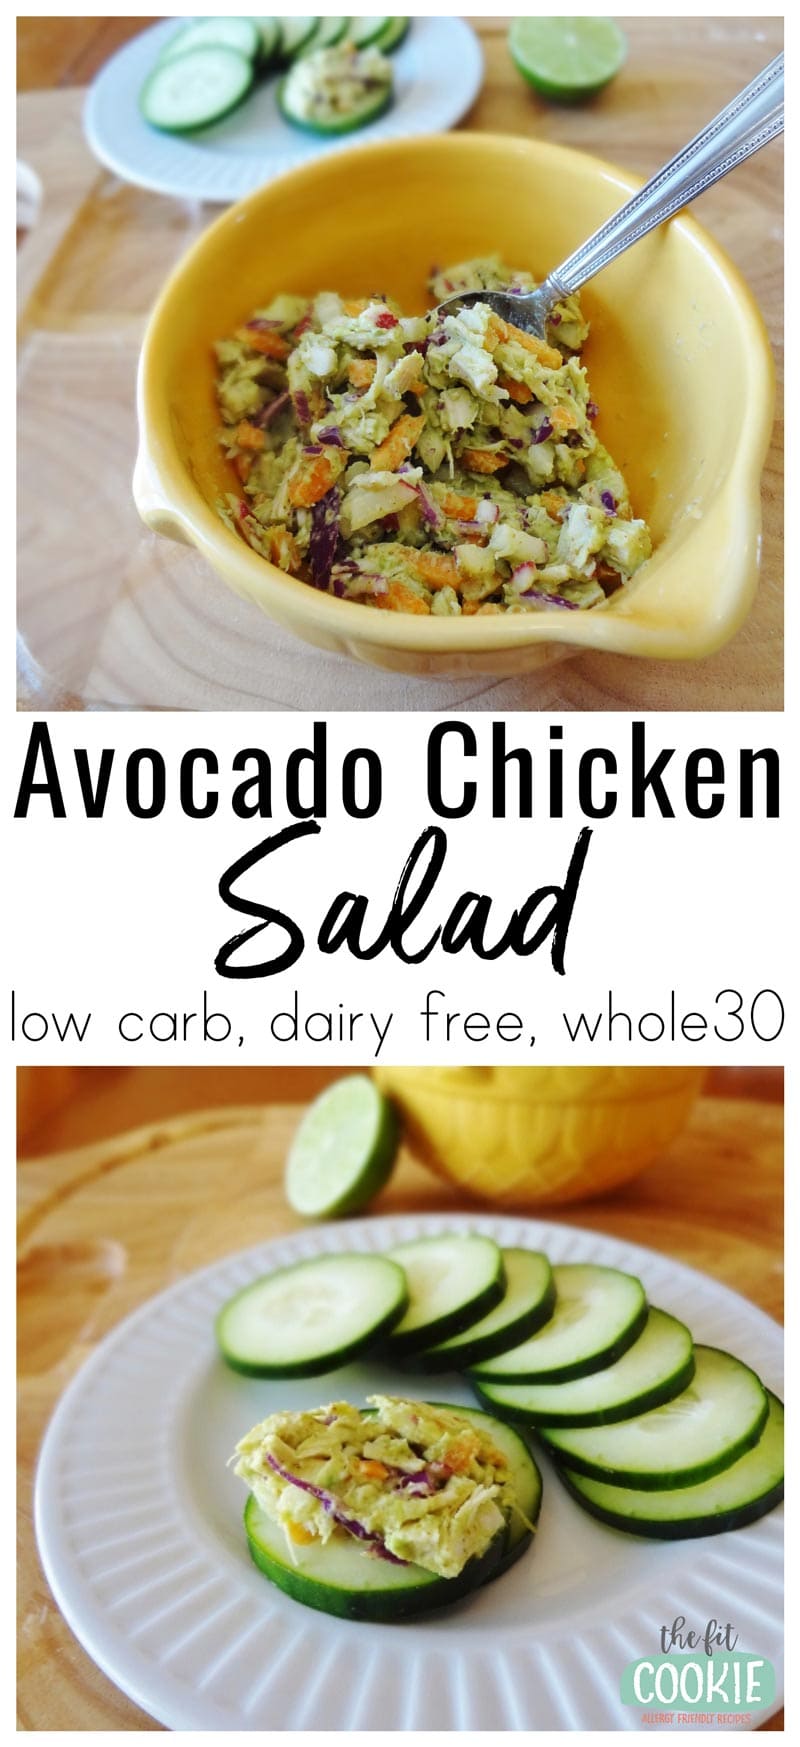 photo collage of avocado chicken salad made without mayo